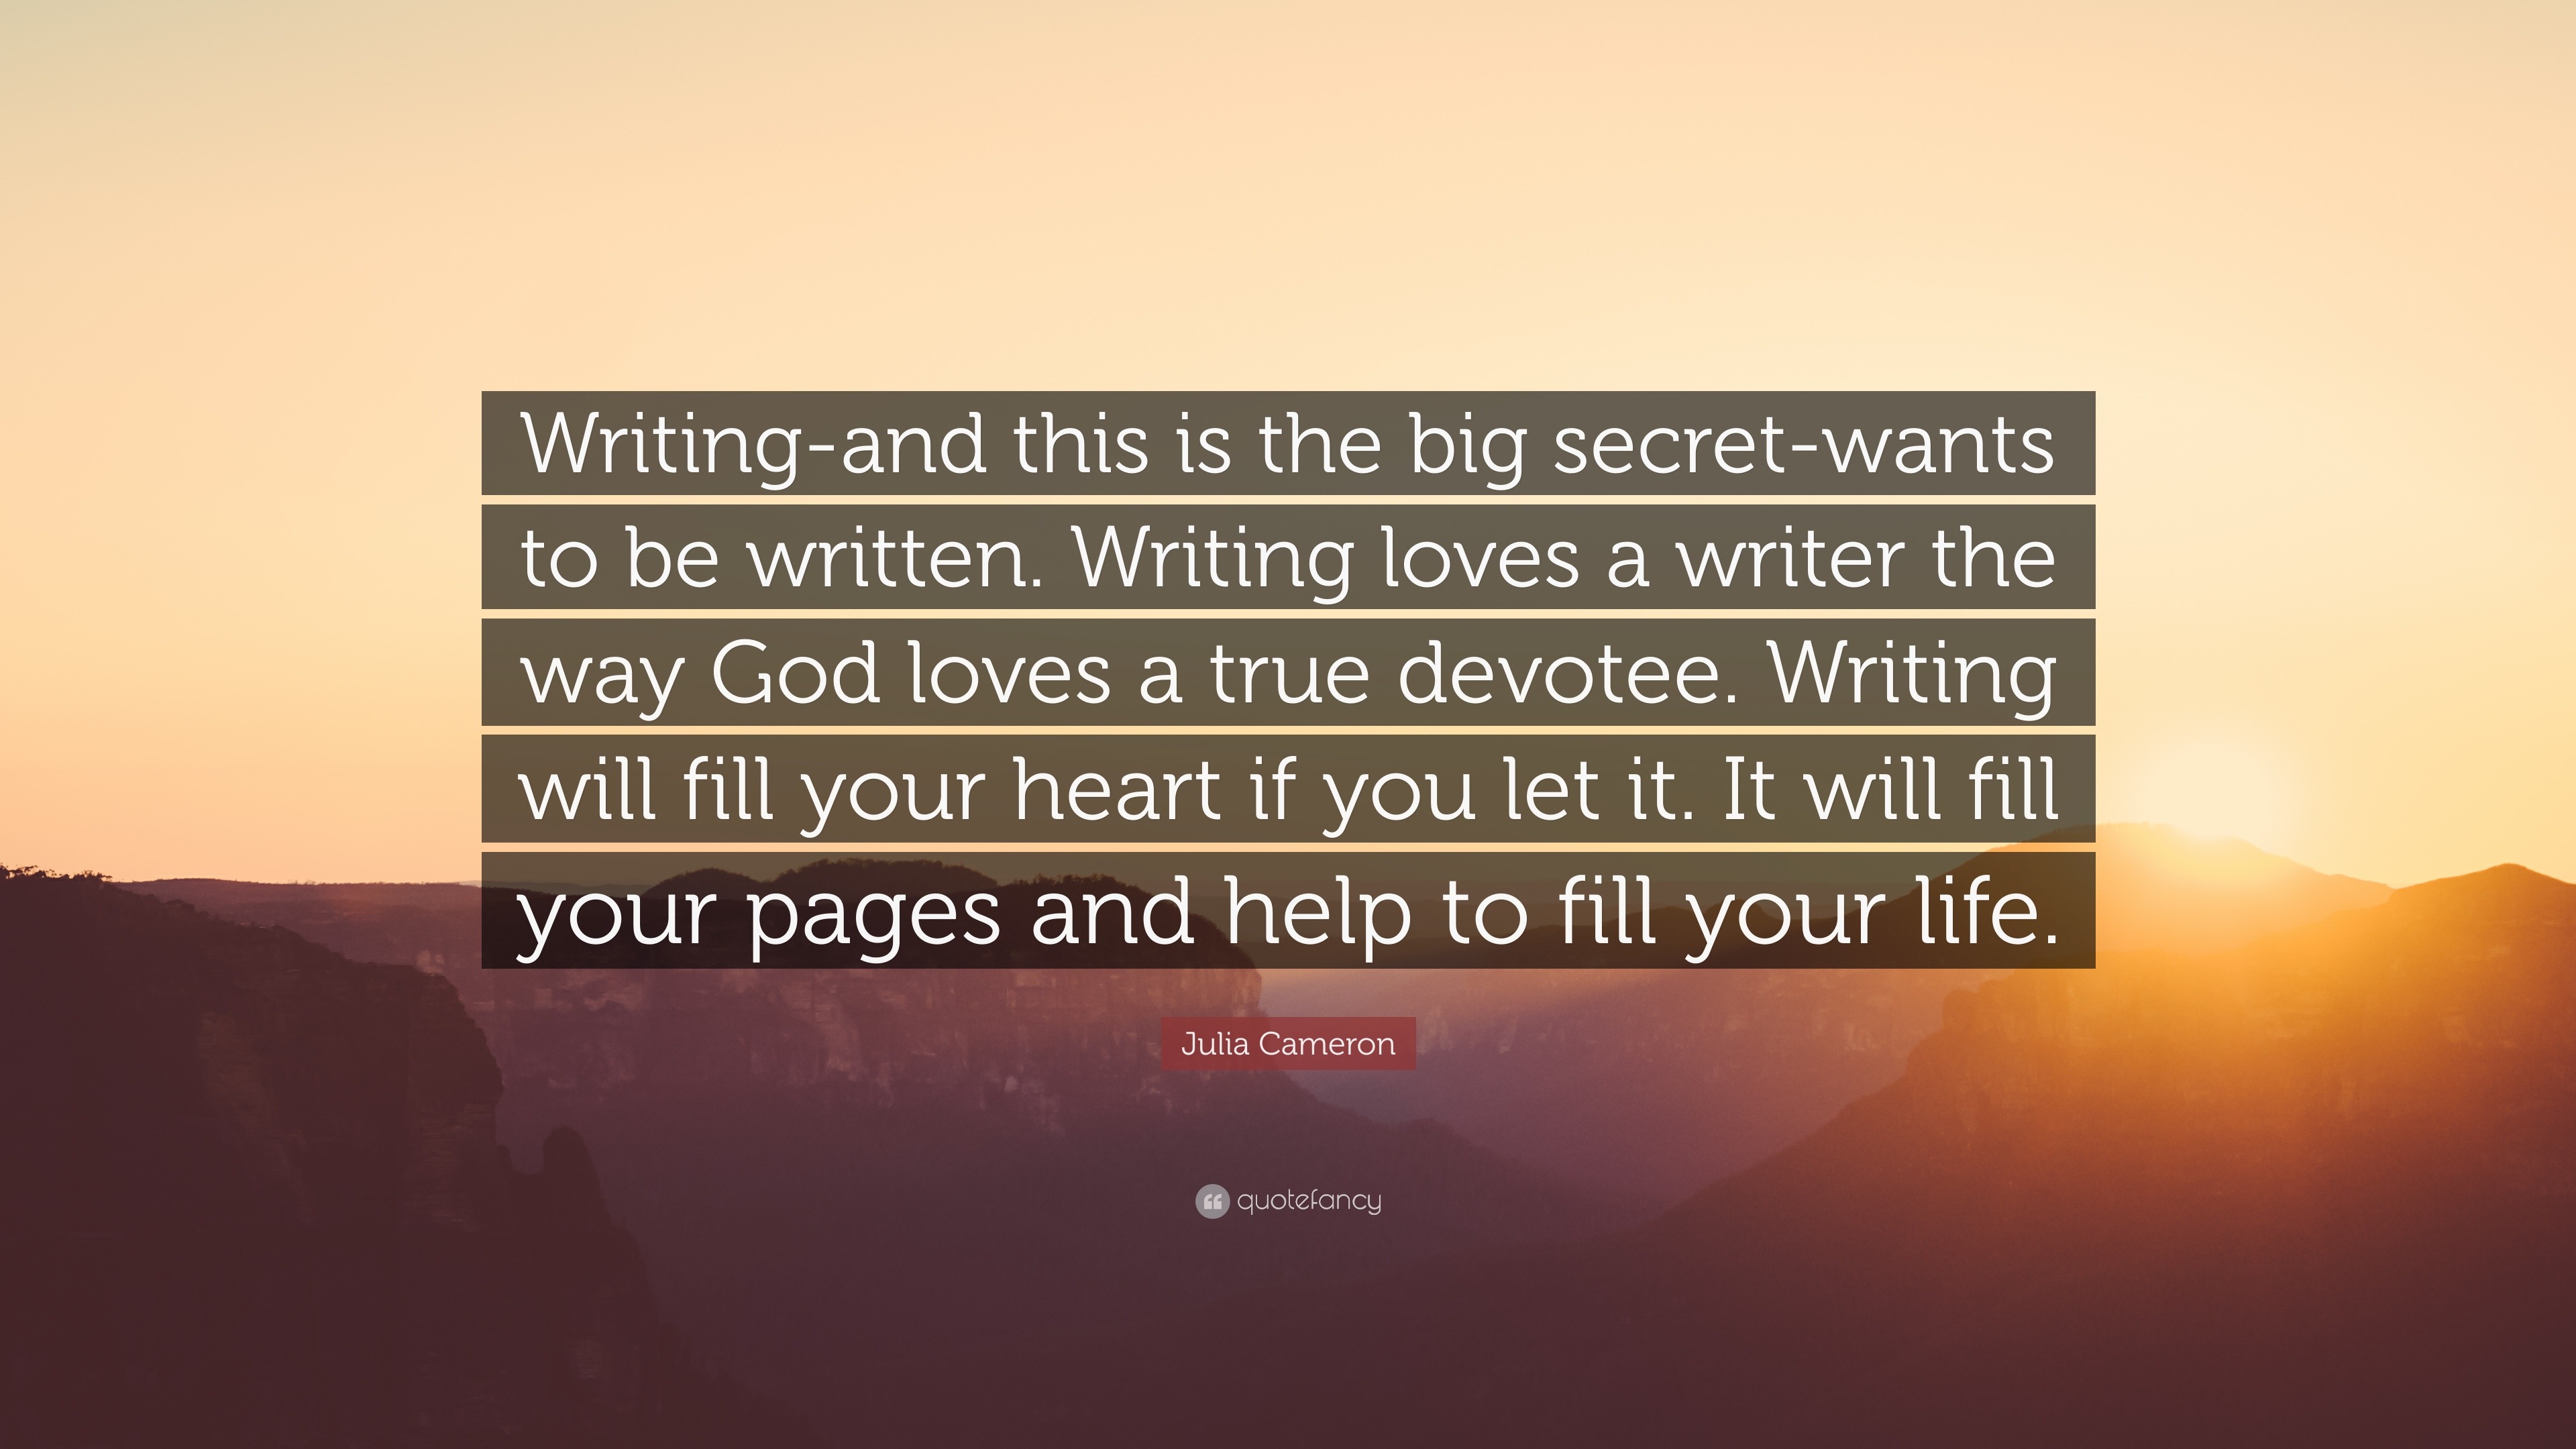 Write for Life by Julia Cameron